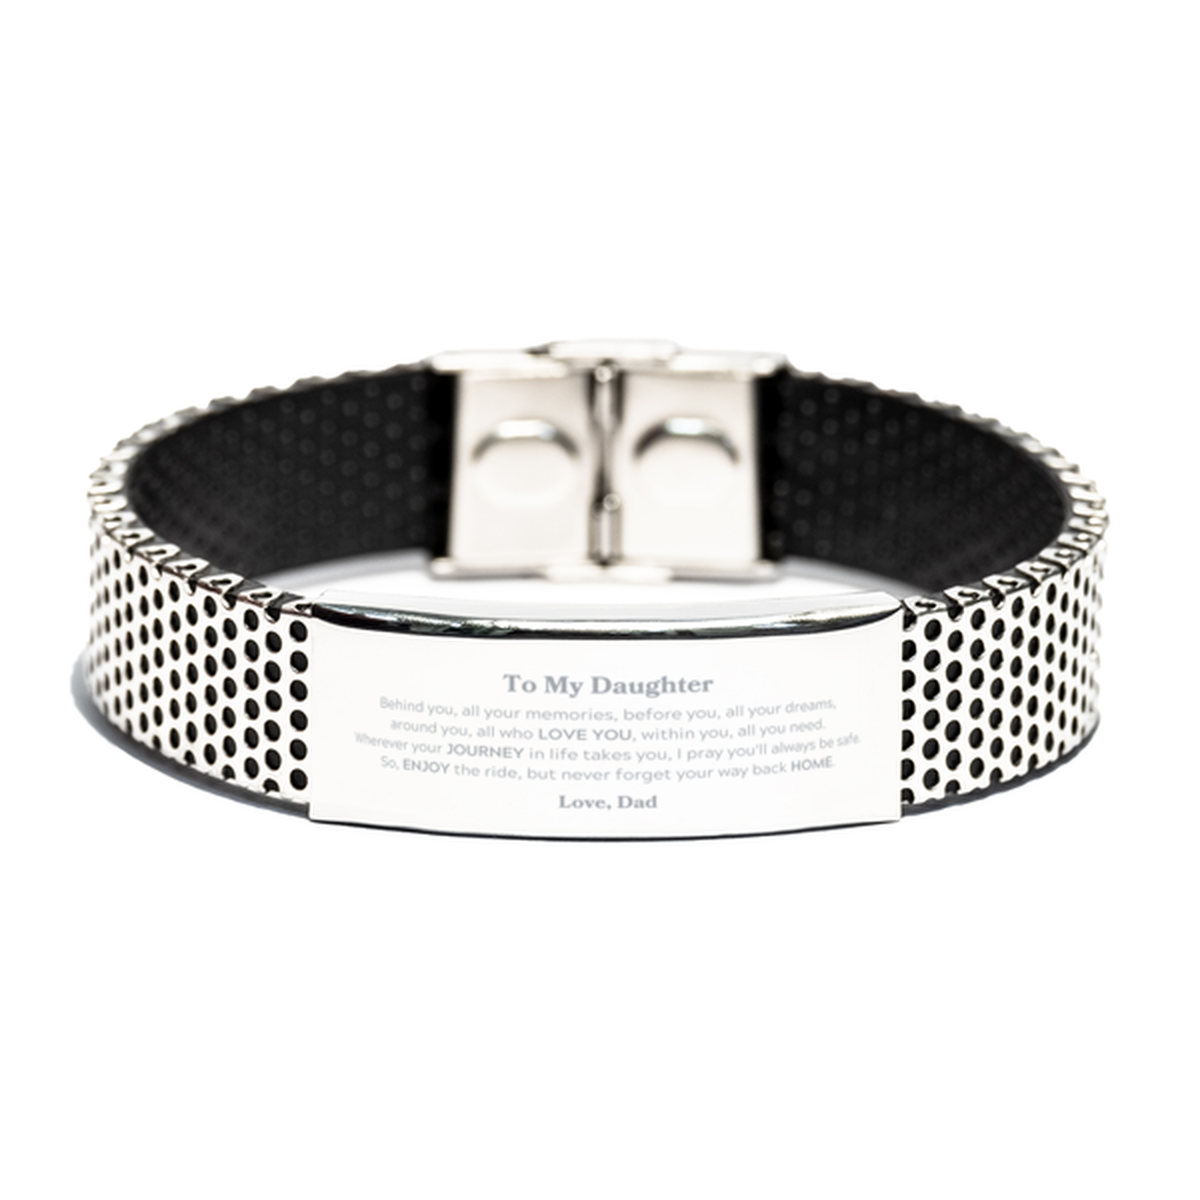 To My Daughter Graduation Gifts from Dad, Daughter Stainless Steel Bracelet Christmas Birthday Gifts for Daughter Behind you, all your memories, before you, all your dreams. Love, Dad